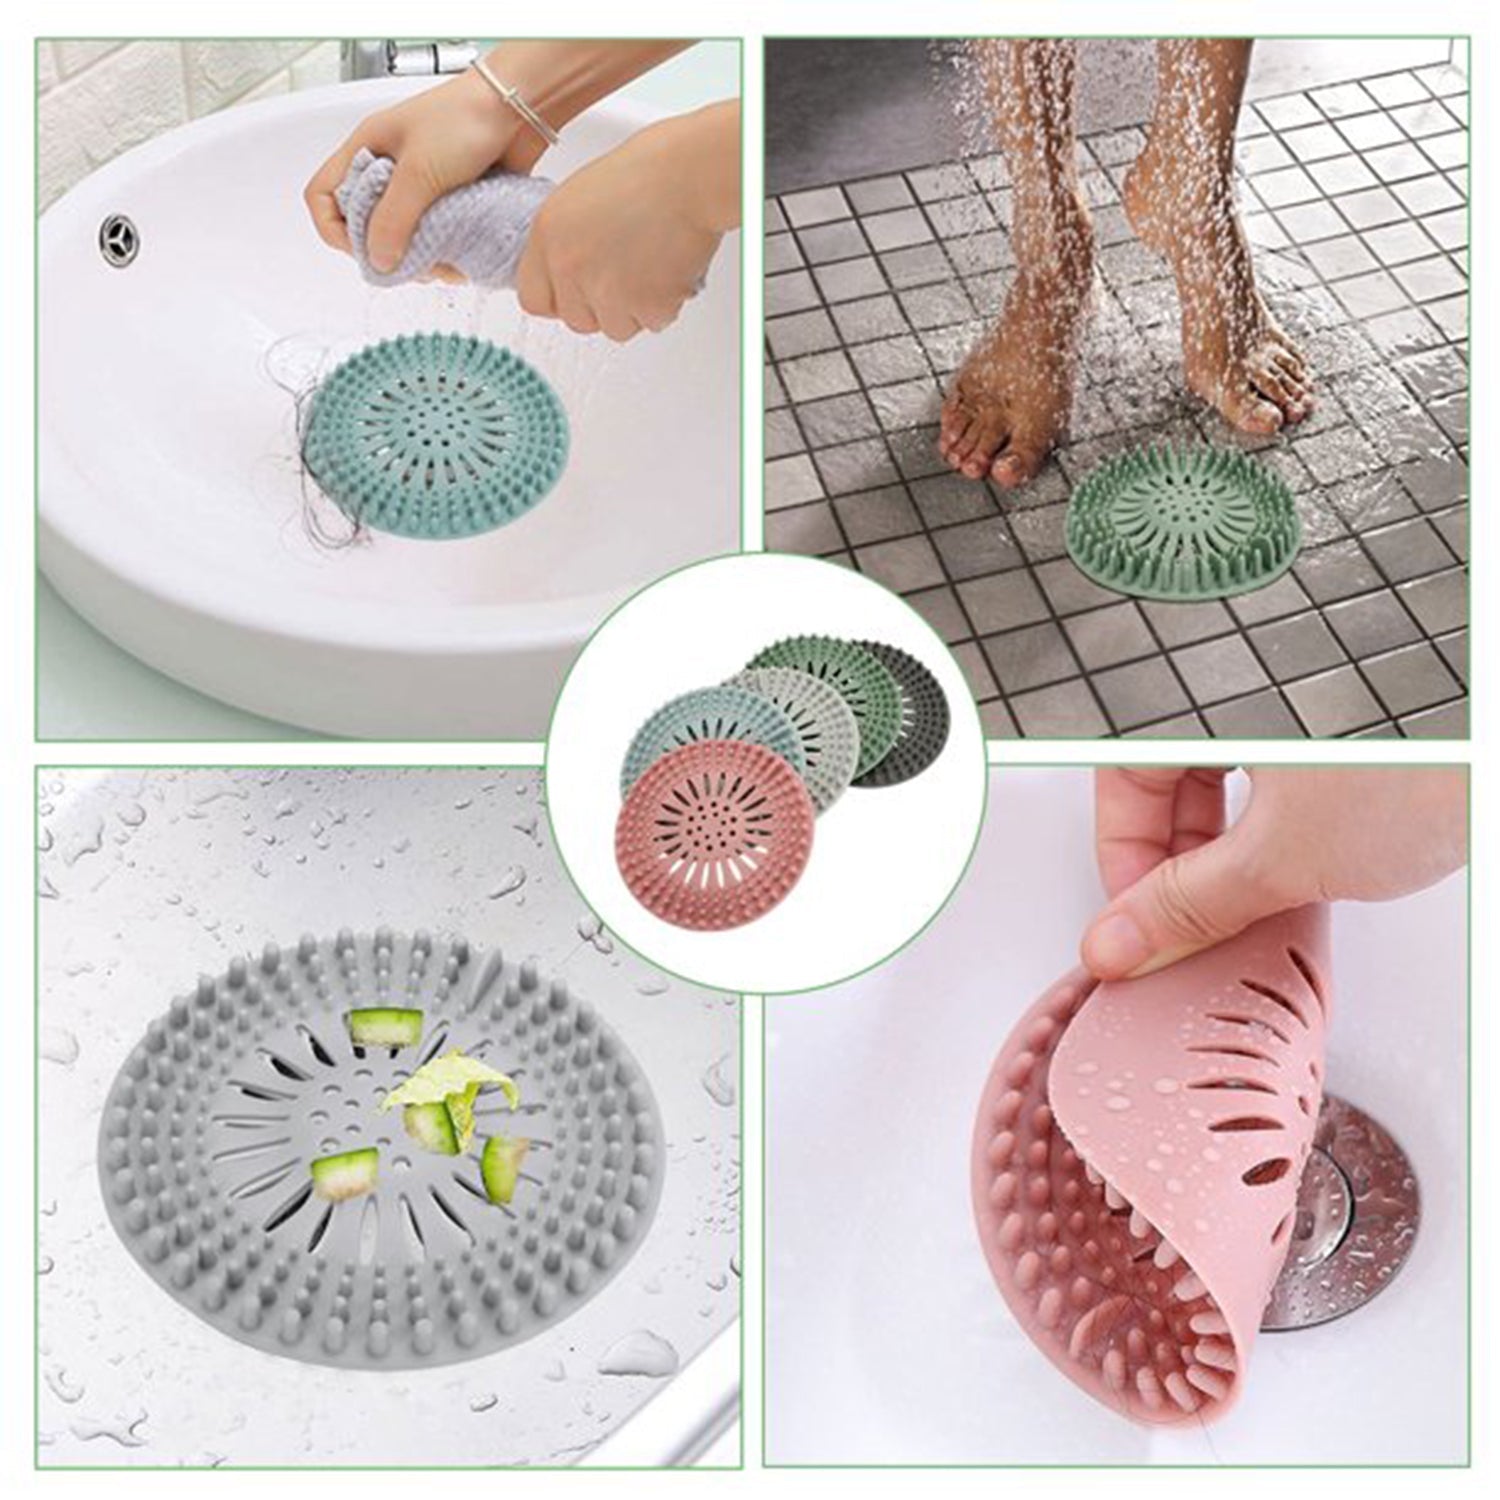 4738 Shower Drain Cover Used for draining water present over floor surfaces of bathroom and toilets etc.